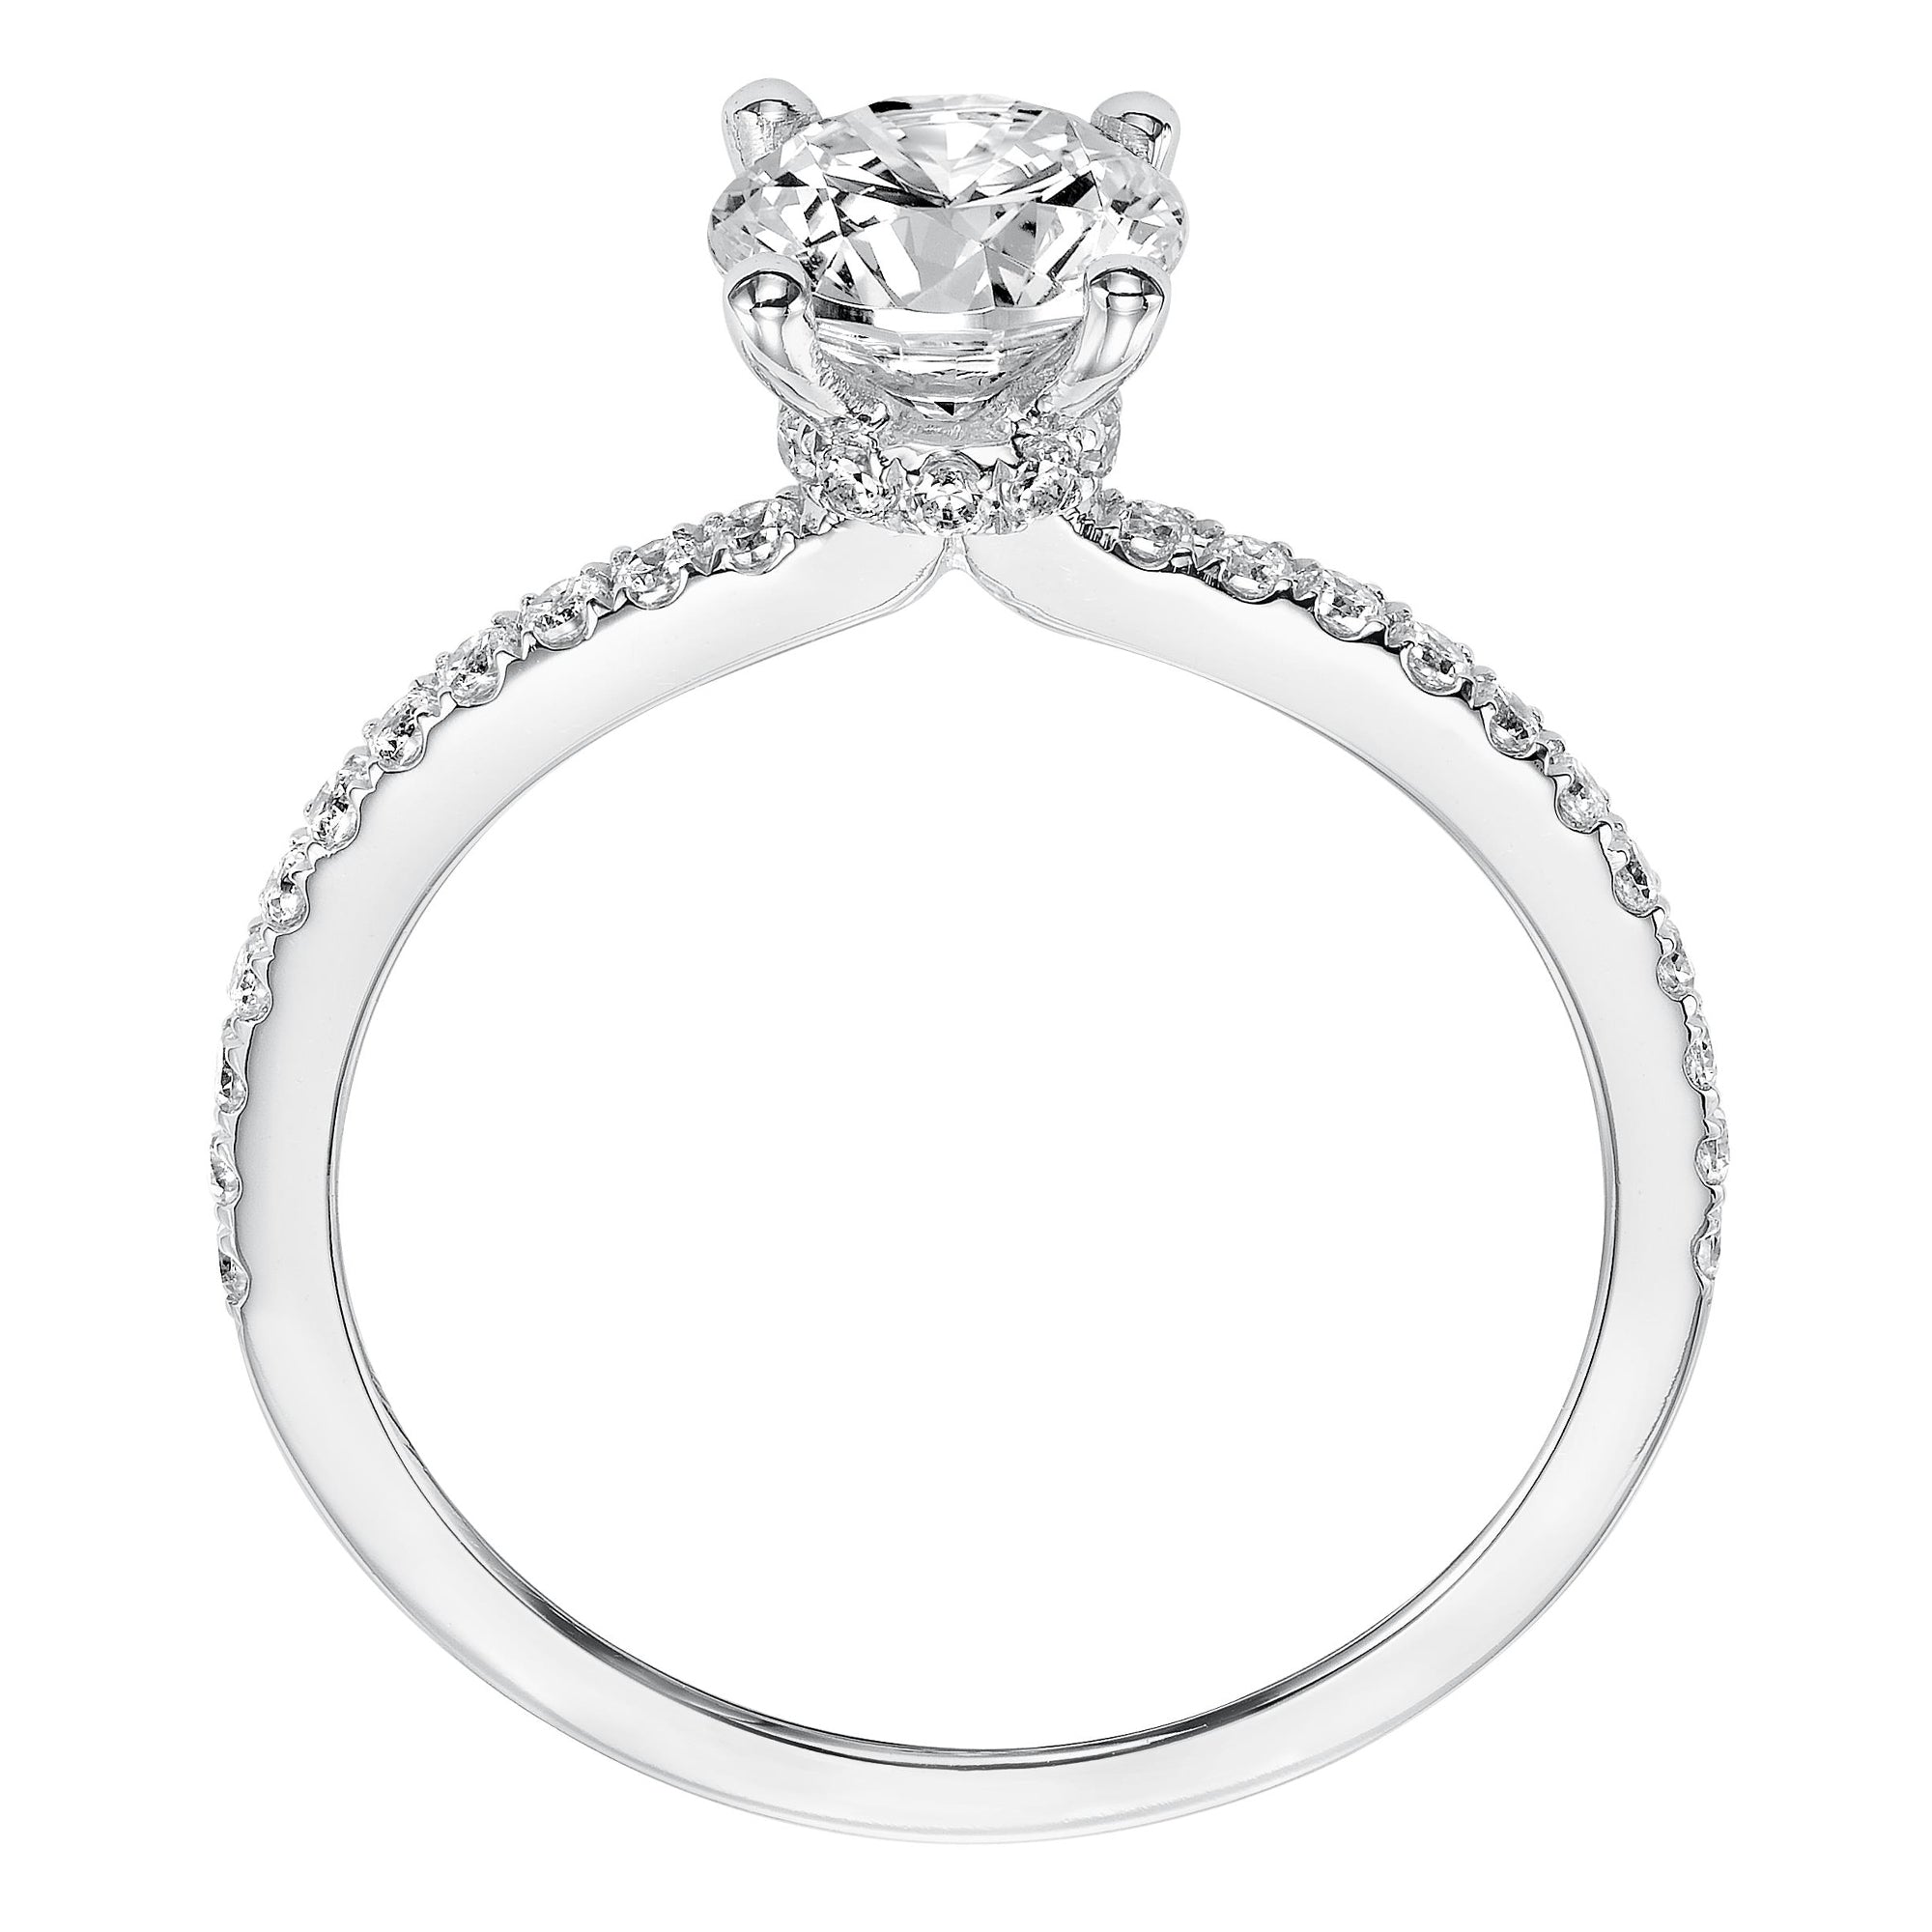 Artcarved Sybil Diamond Setting in 14kt White Gold (1/3ct tw)